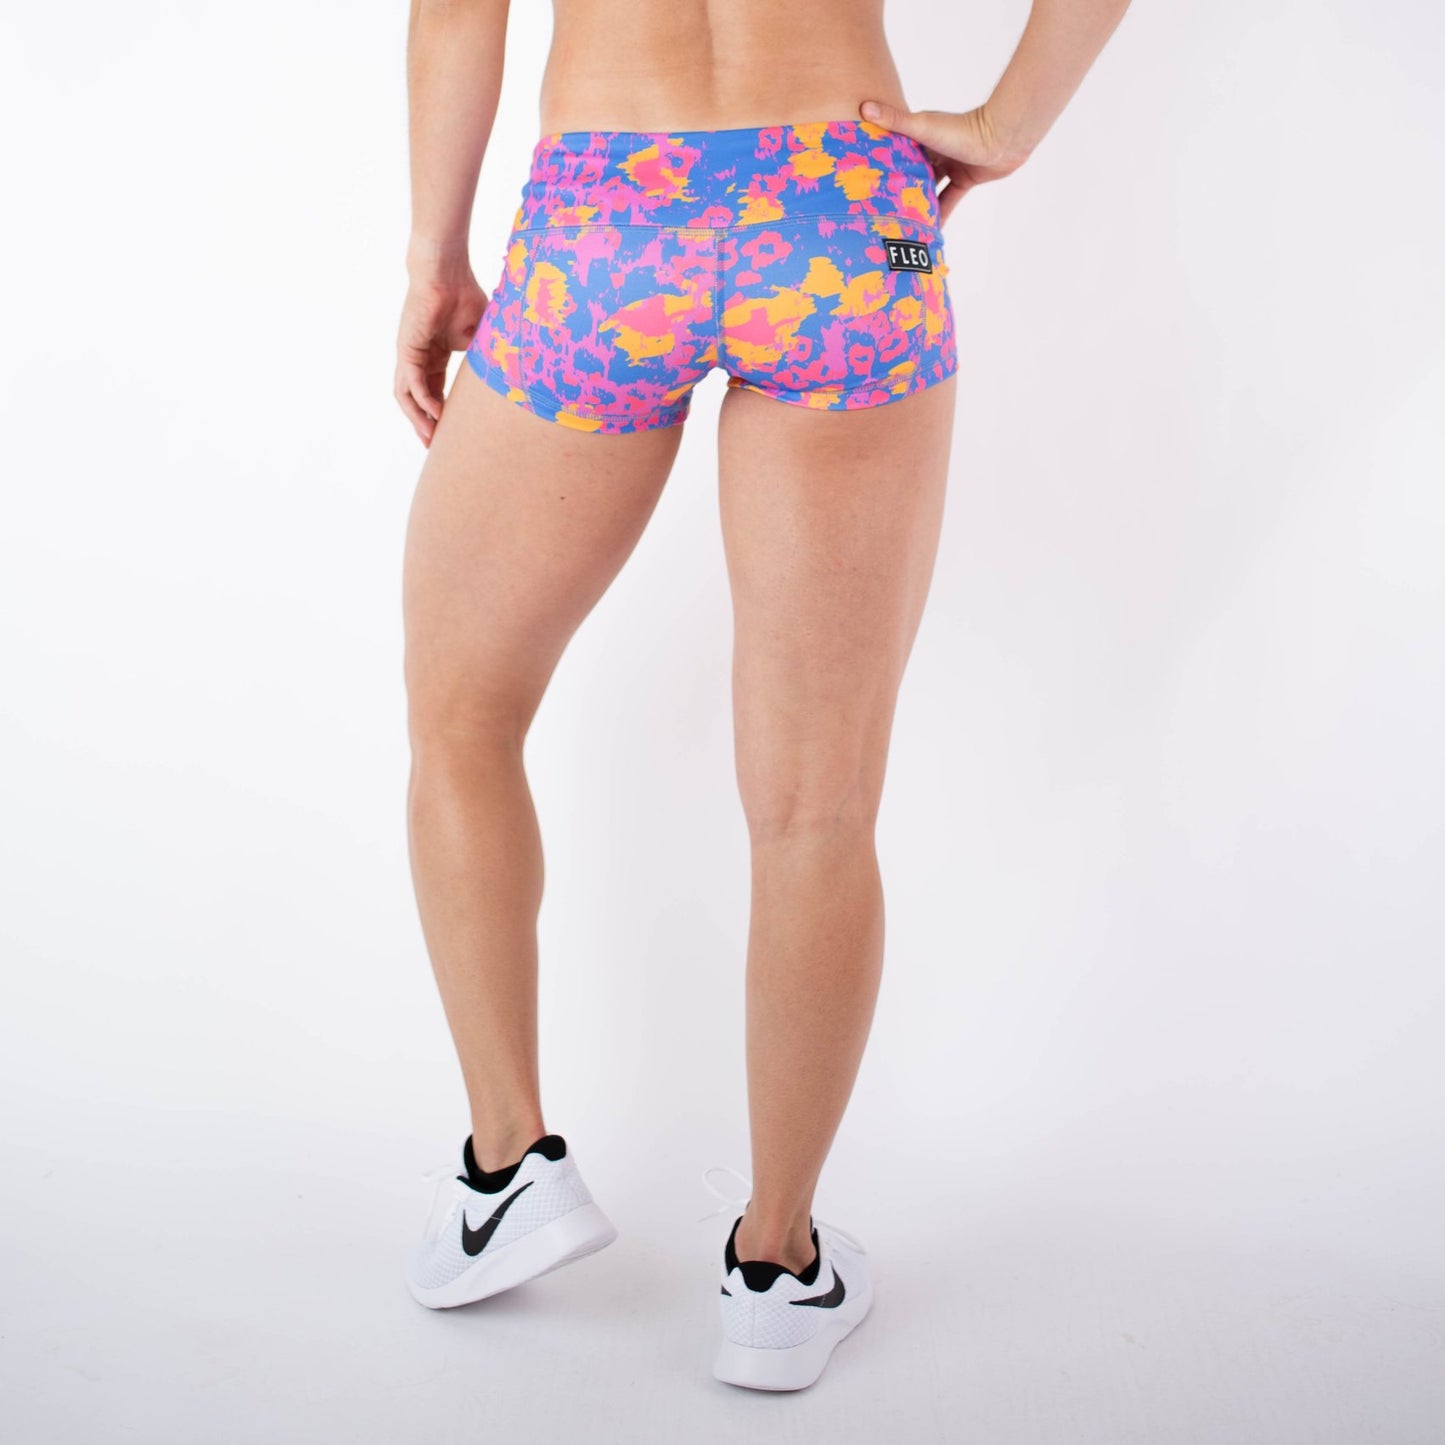 FLEO Berry Nice Shorts (Low-rise Contour) - 9 for 9